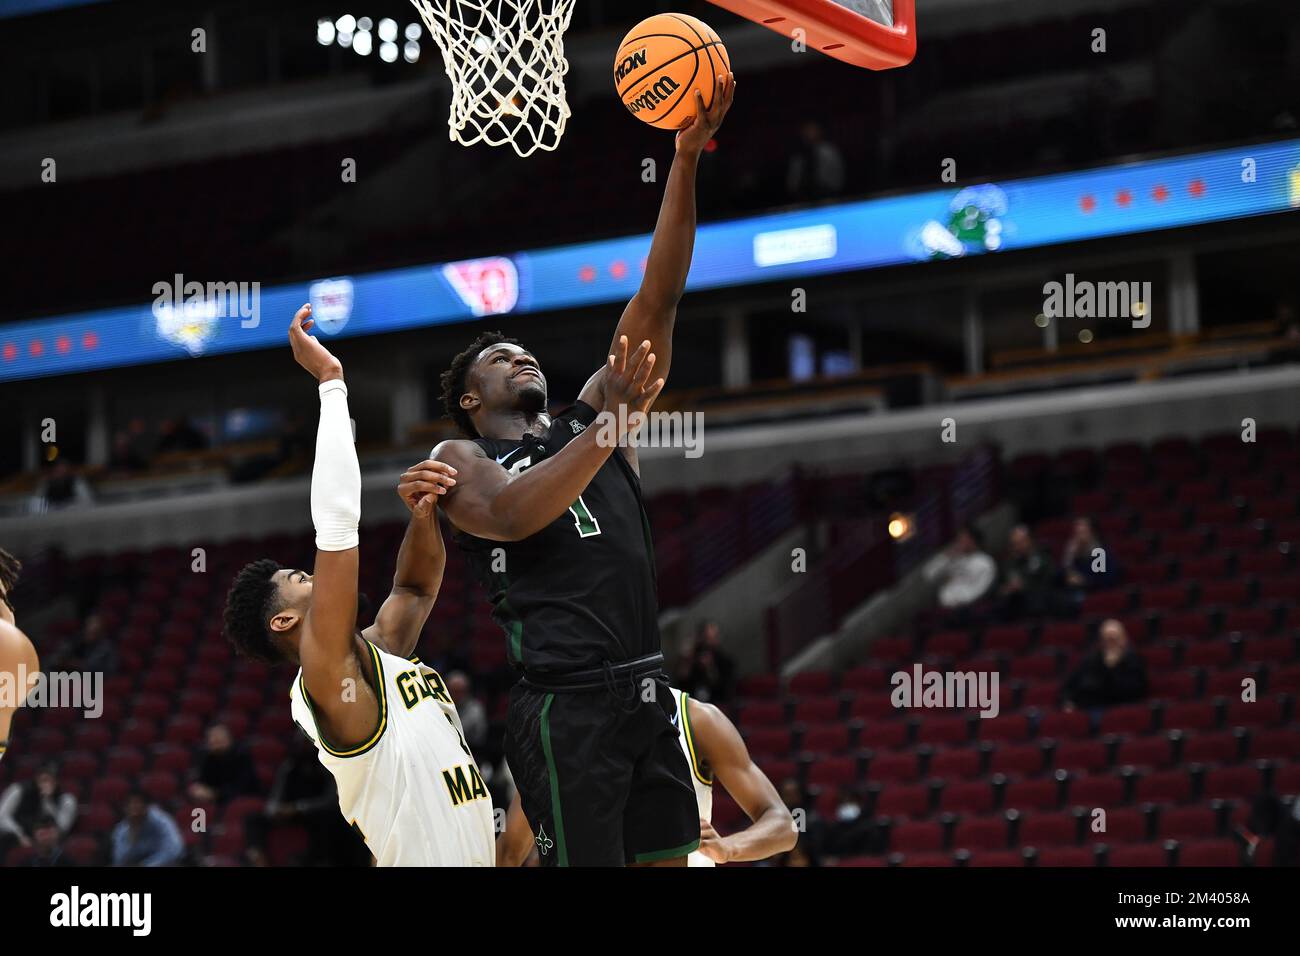 Chicago, Illinois, USA. 17th Dec, 2022. Tulane Green Wave guard Sion James (1) drives down the lane for a layup during the NCAA basketball game between Tulane vs George Mason at United Center in Chicago, Illinois. Dean Reid/CSM/Alamy Live News Stock Photo